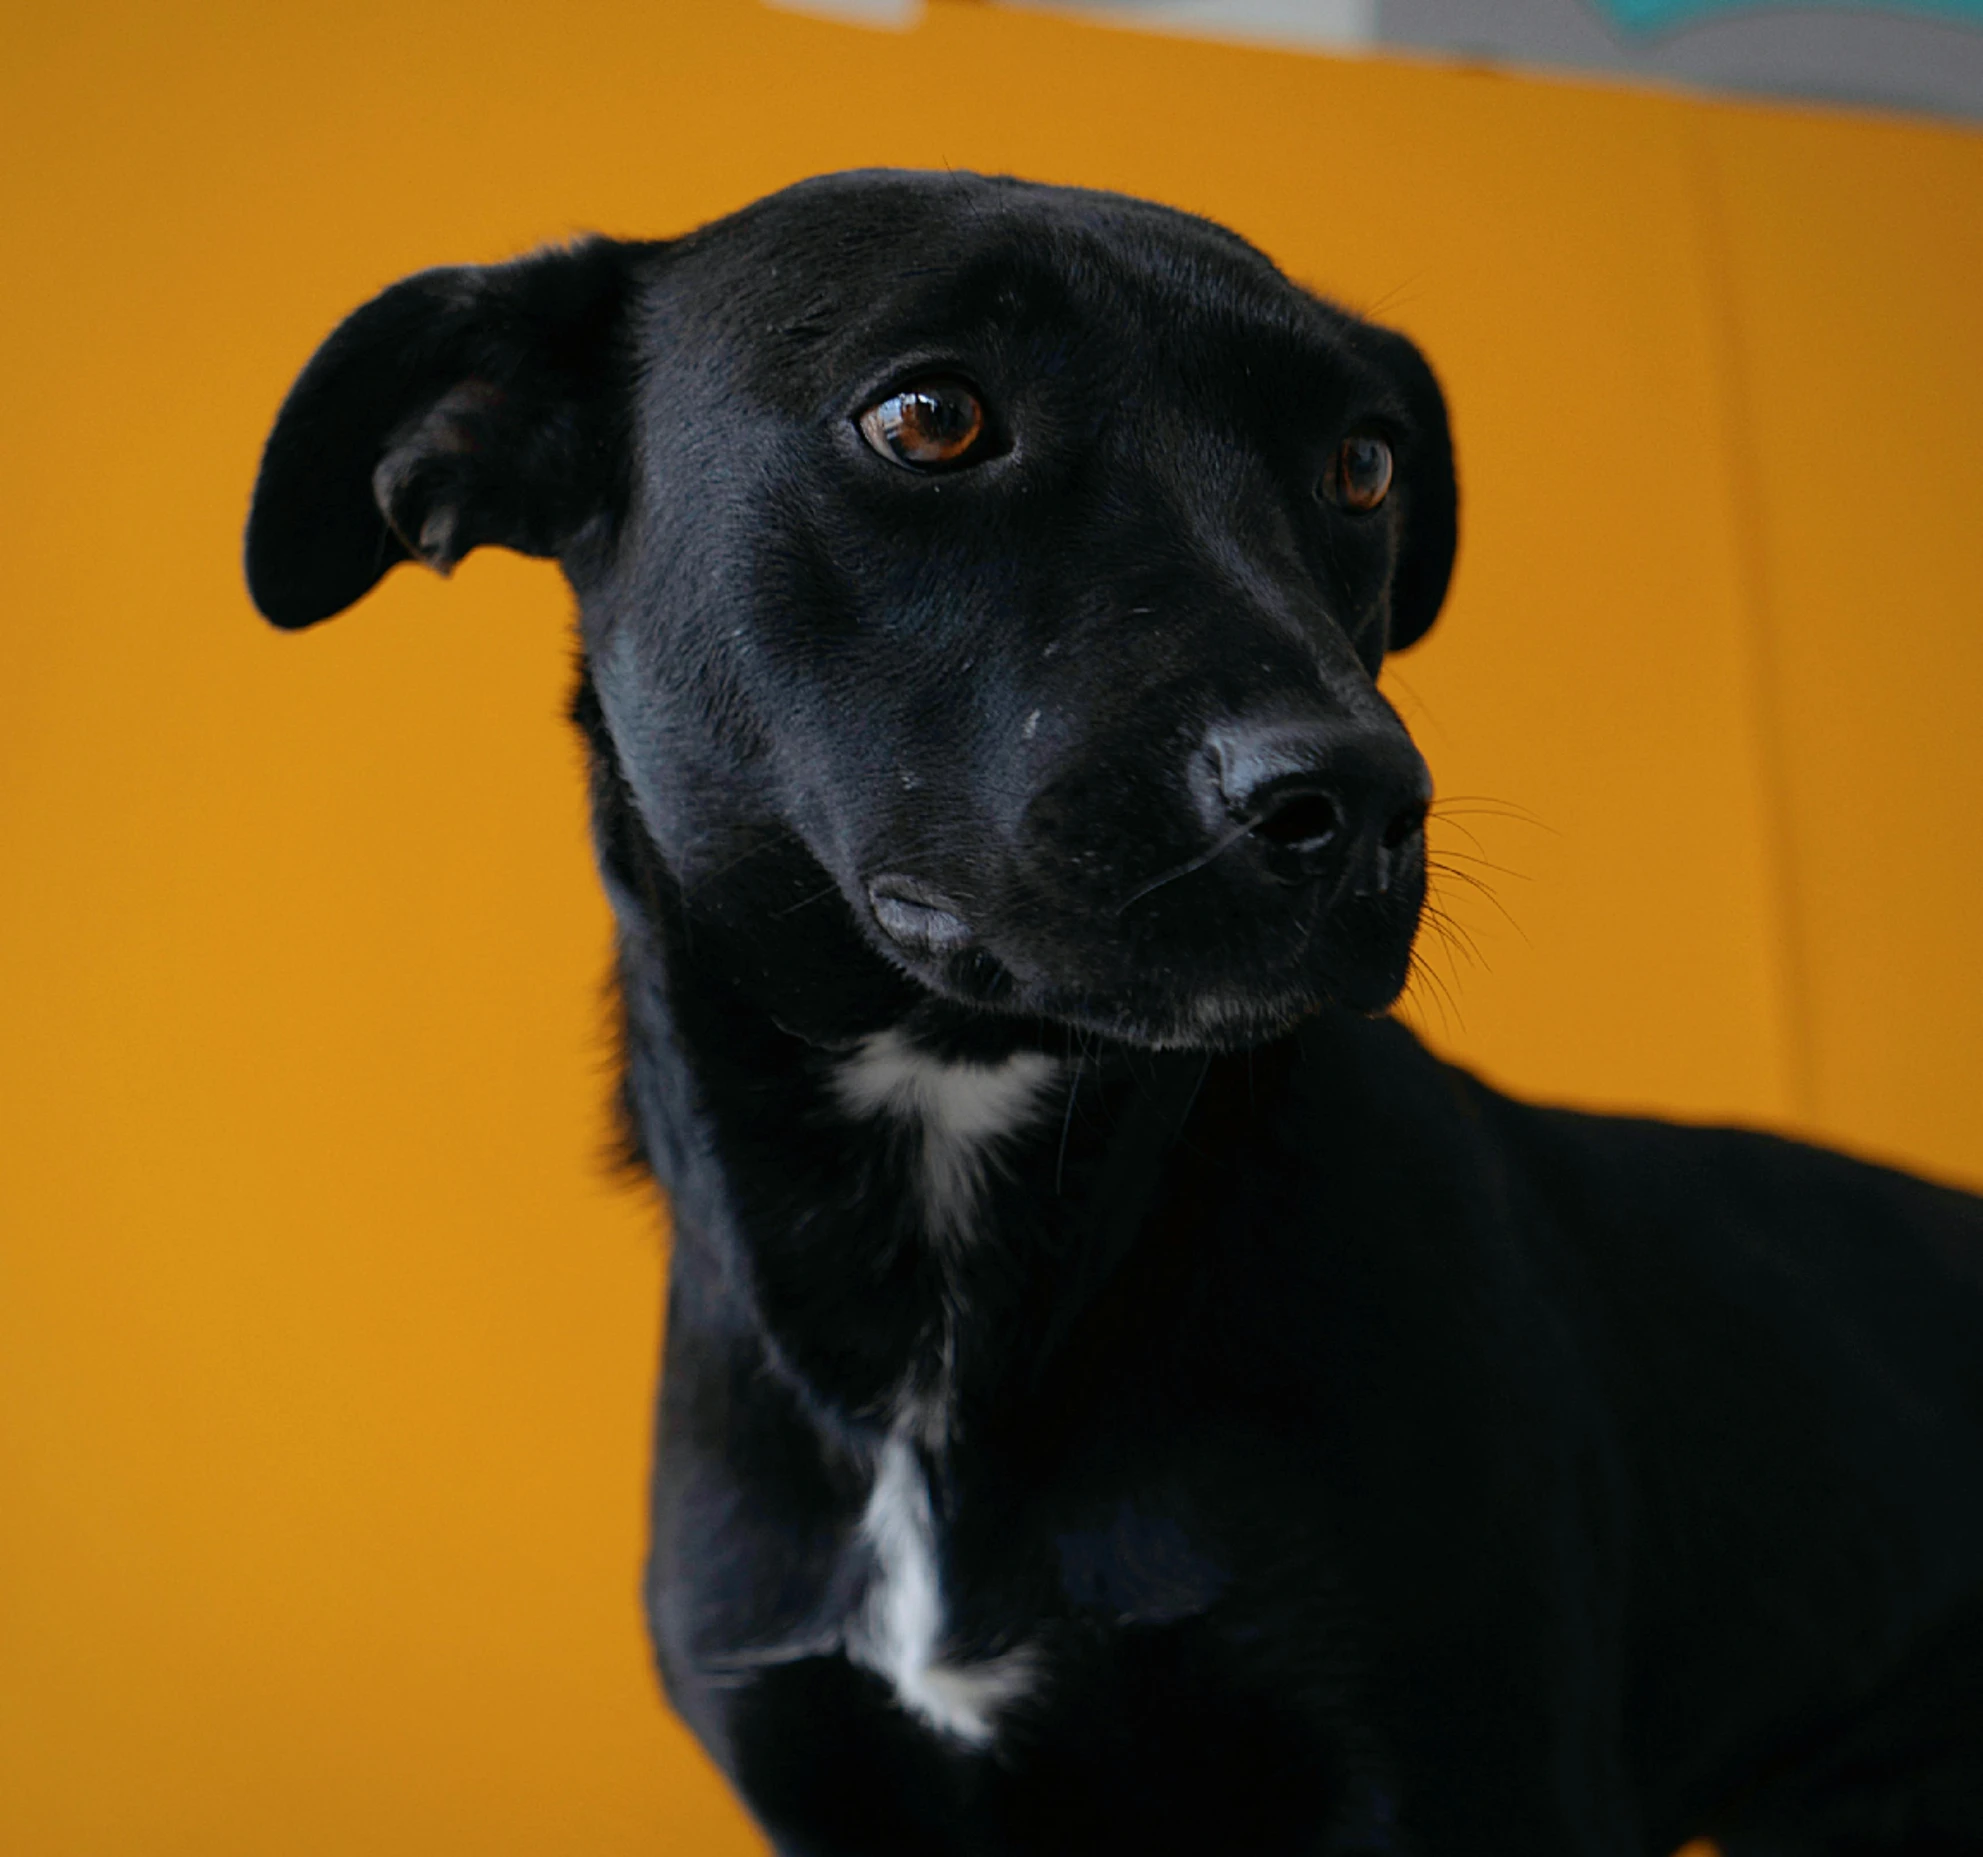 a black dog on an orange background in the image